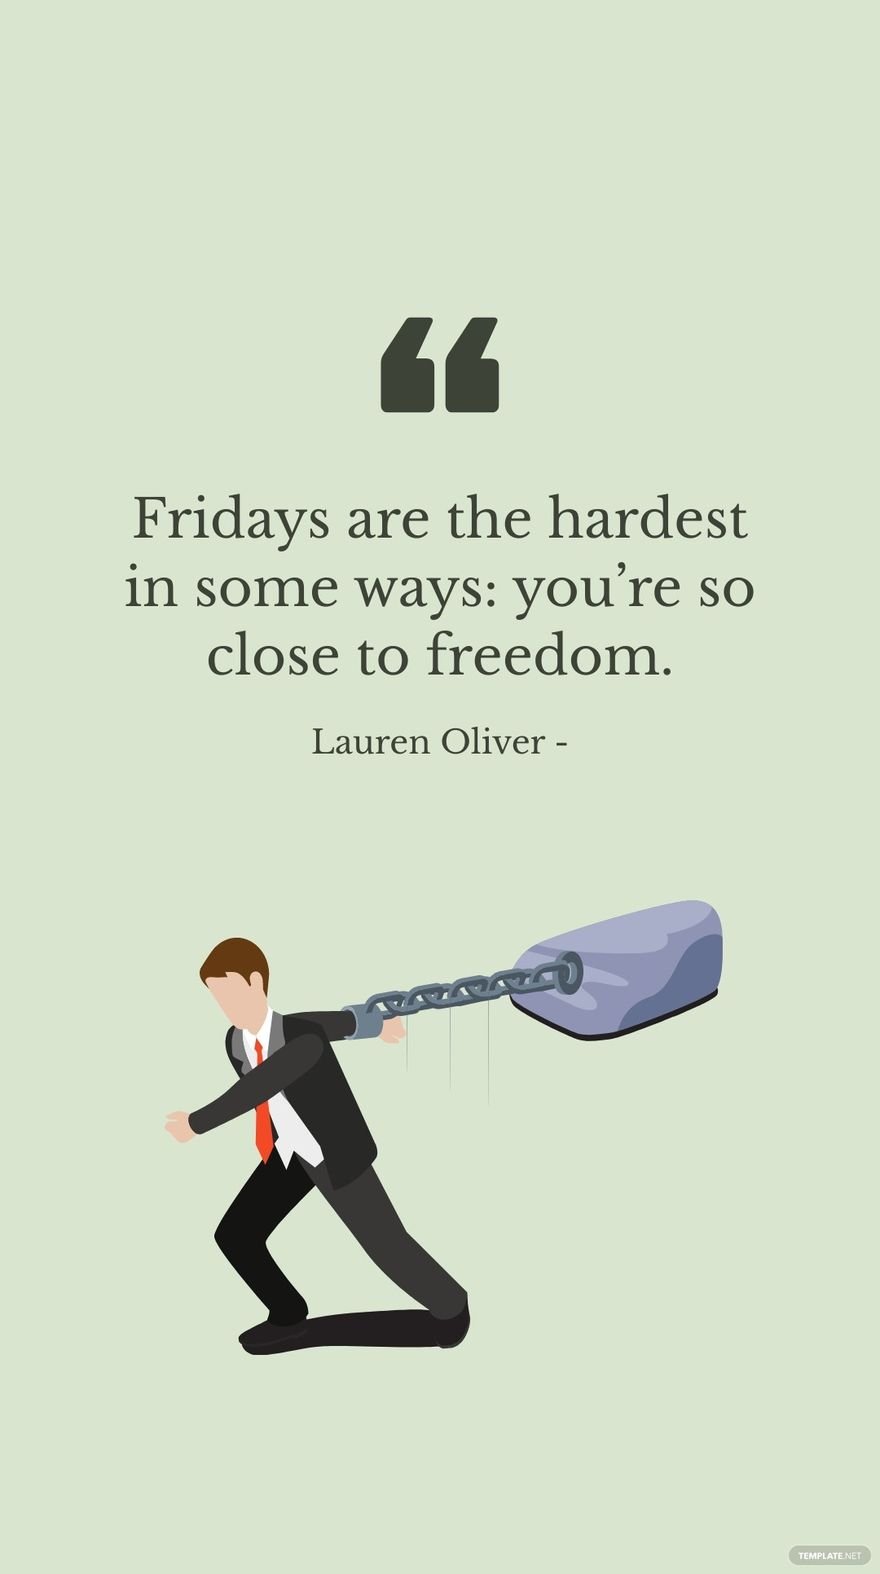 Lauren Oliver - Fridays are the hardest in some ways: you’re so close to freedom.